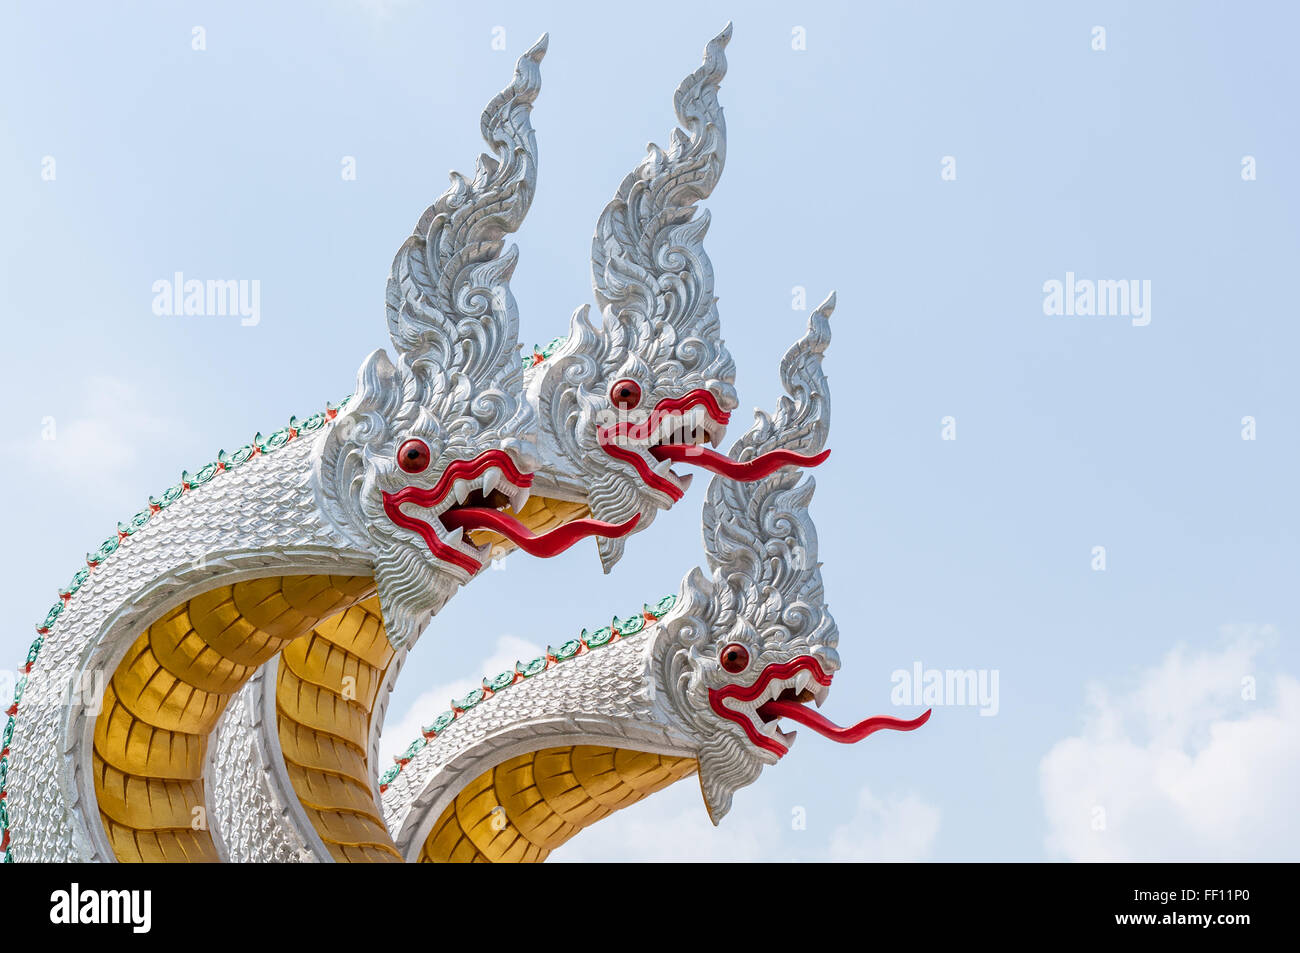 Silver dragon sculpture with three head in the traditional Thai style. Stock Photo